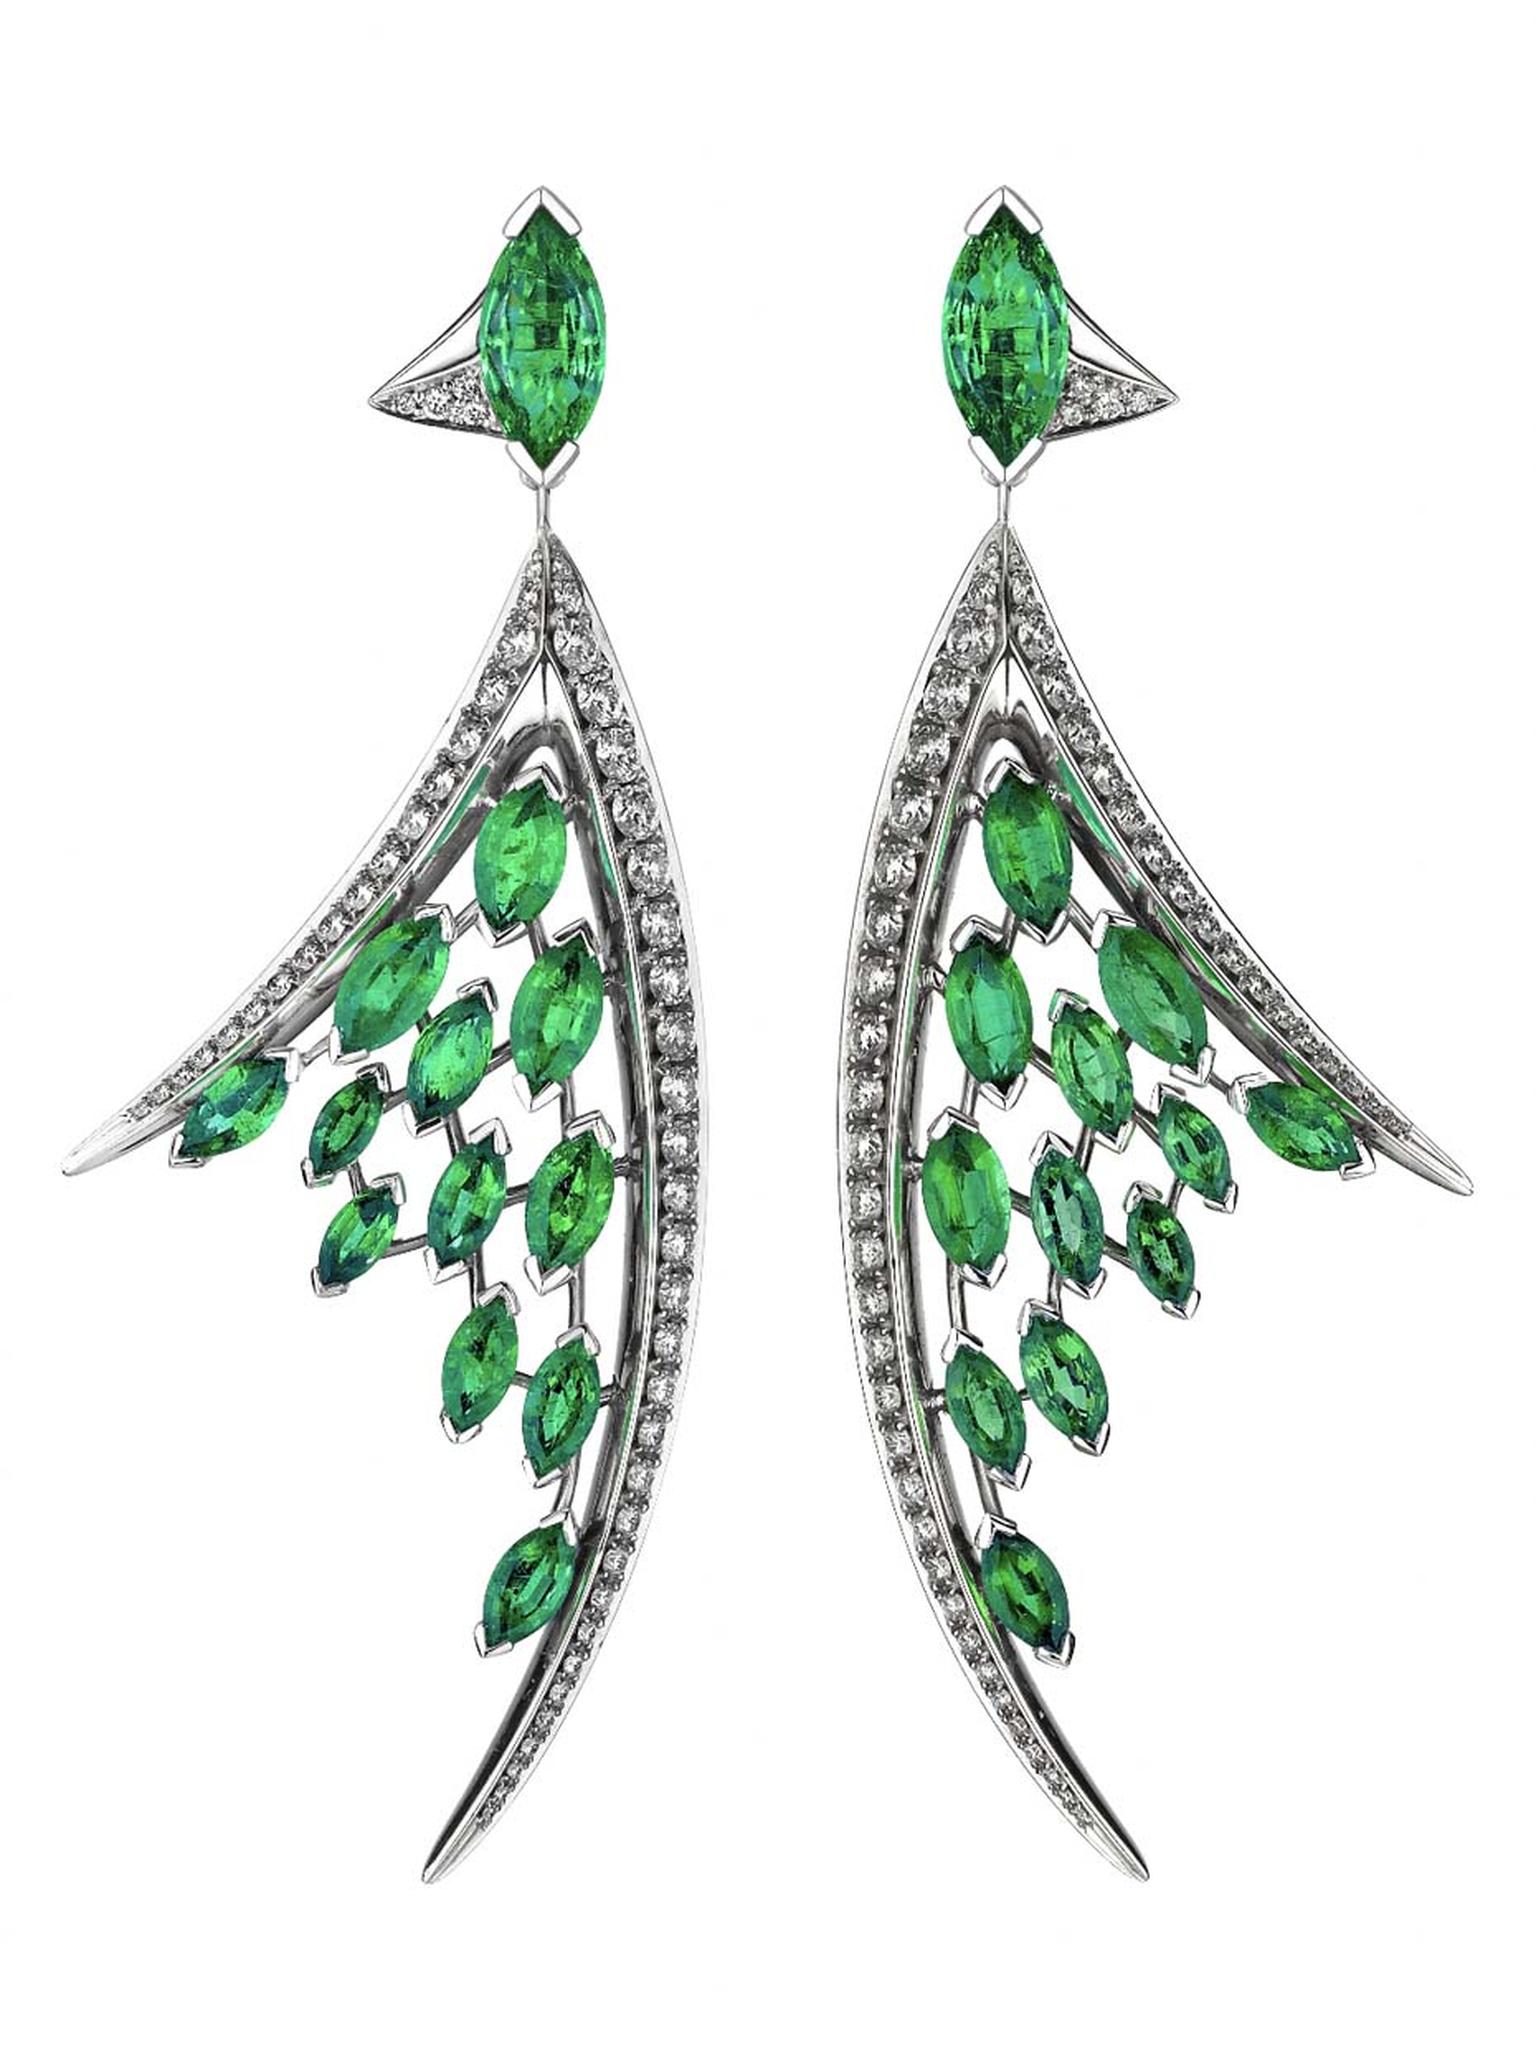 African emeralds: the modern-day gem that has made its way into